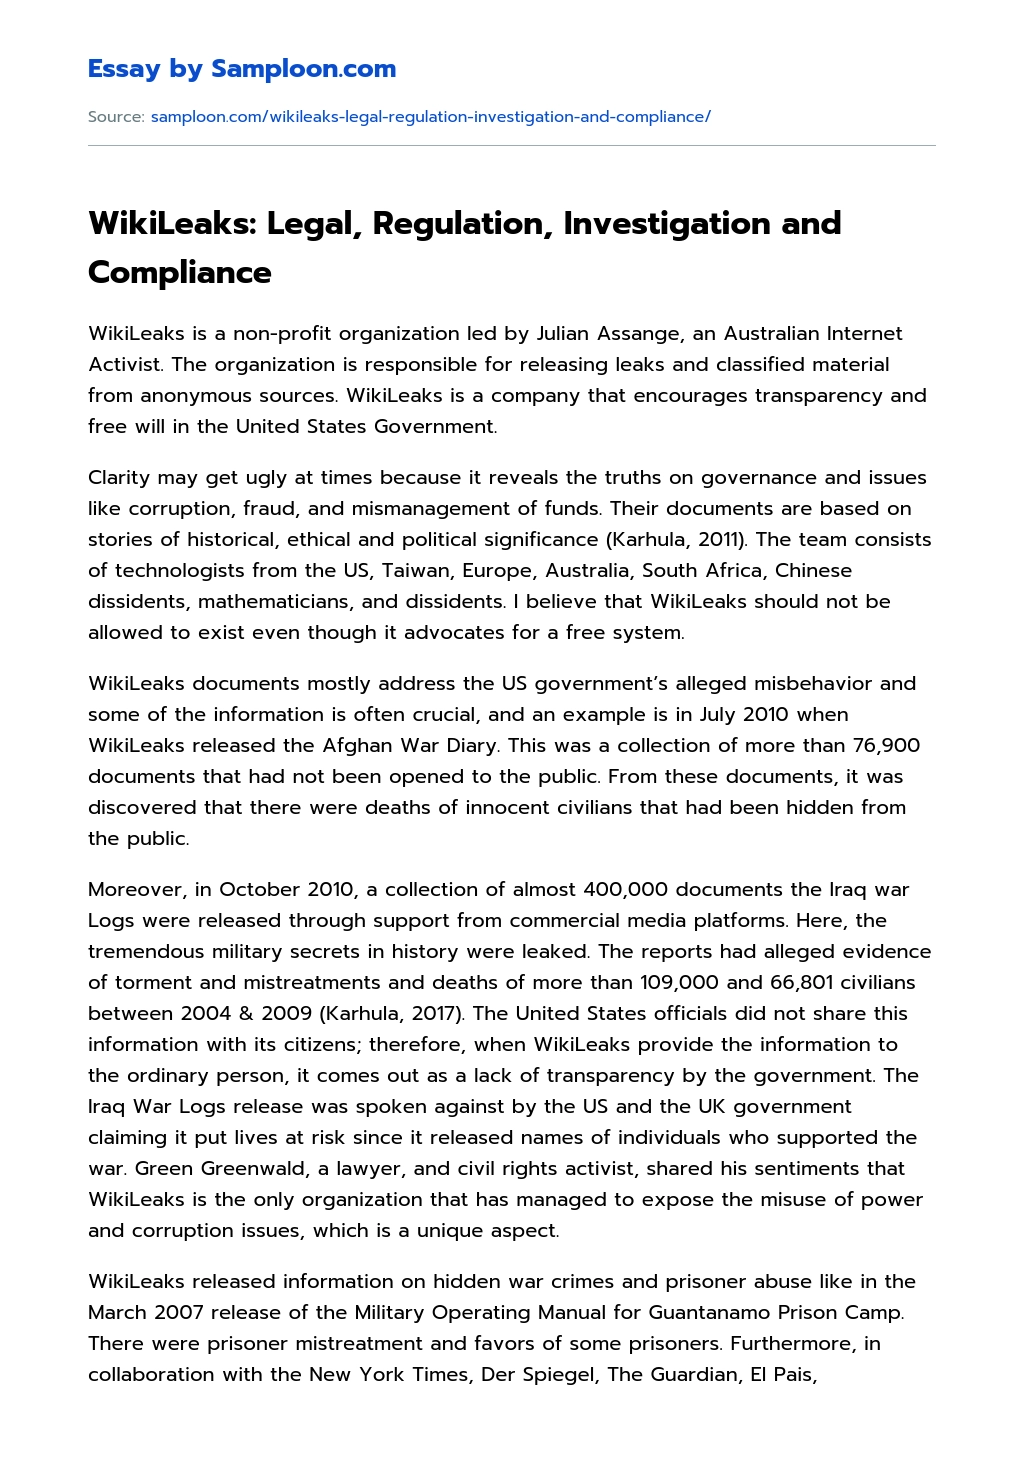 WikiLeaks: Legal, Regulation, Investigation and Compliance essay